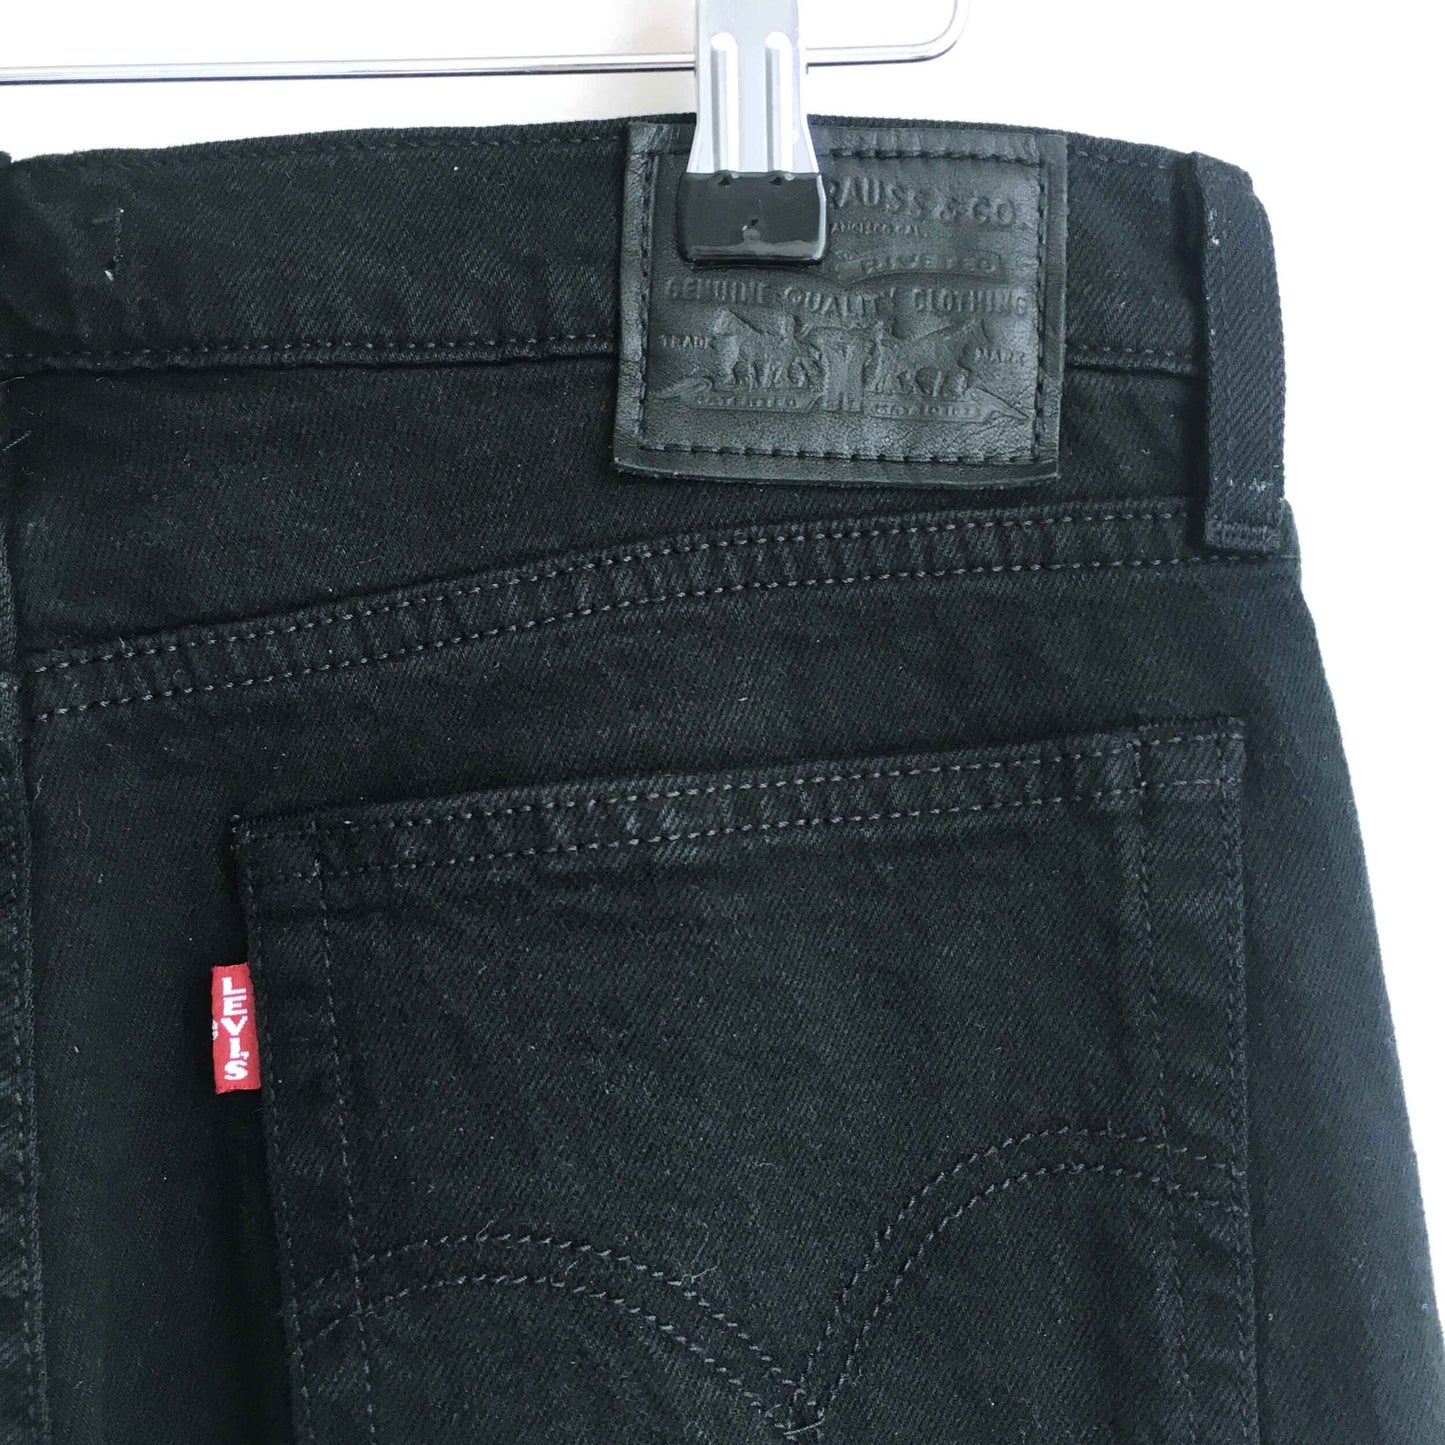 Levi's Wedgie Straight High Rise Jean - size 28